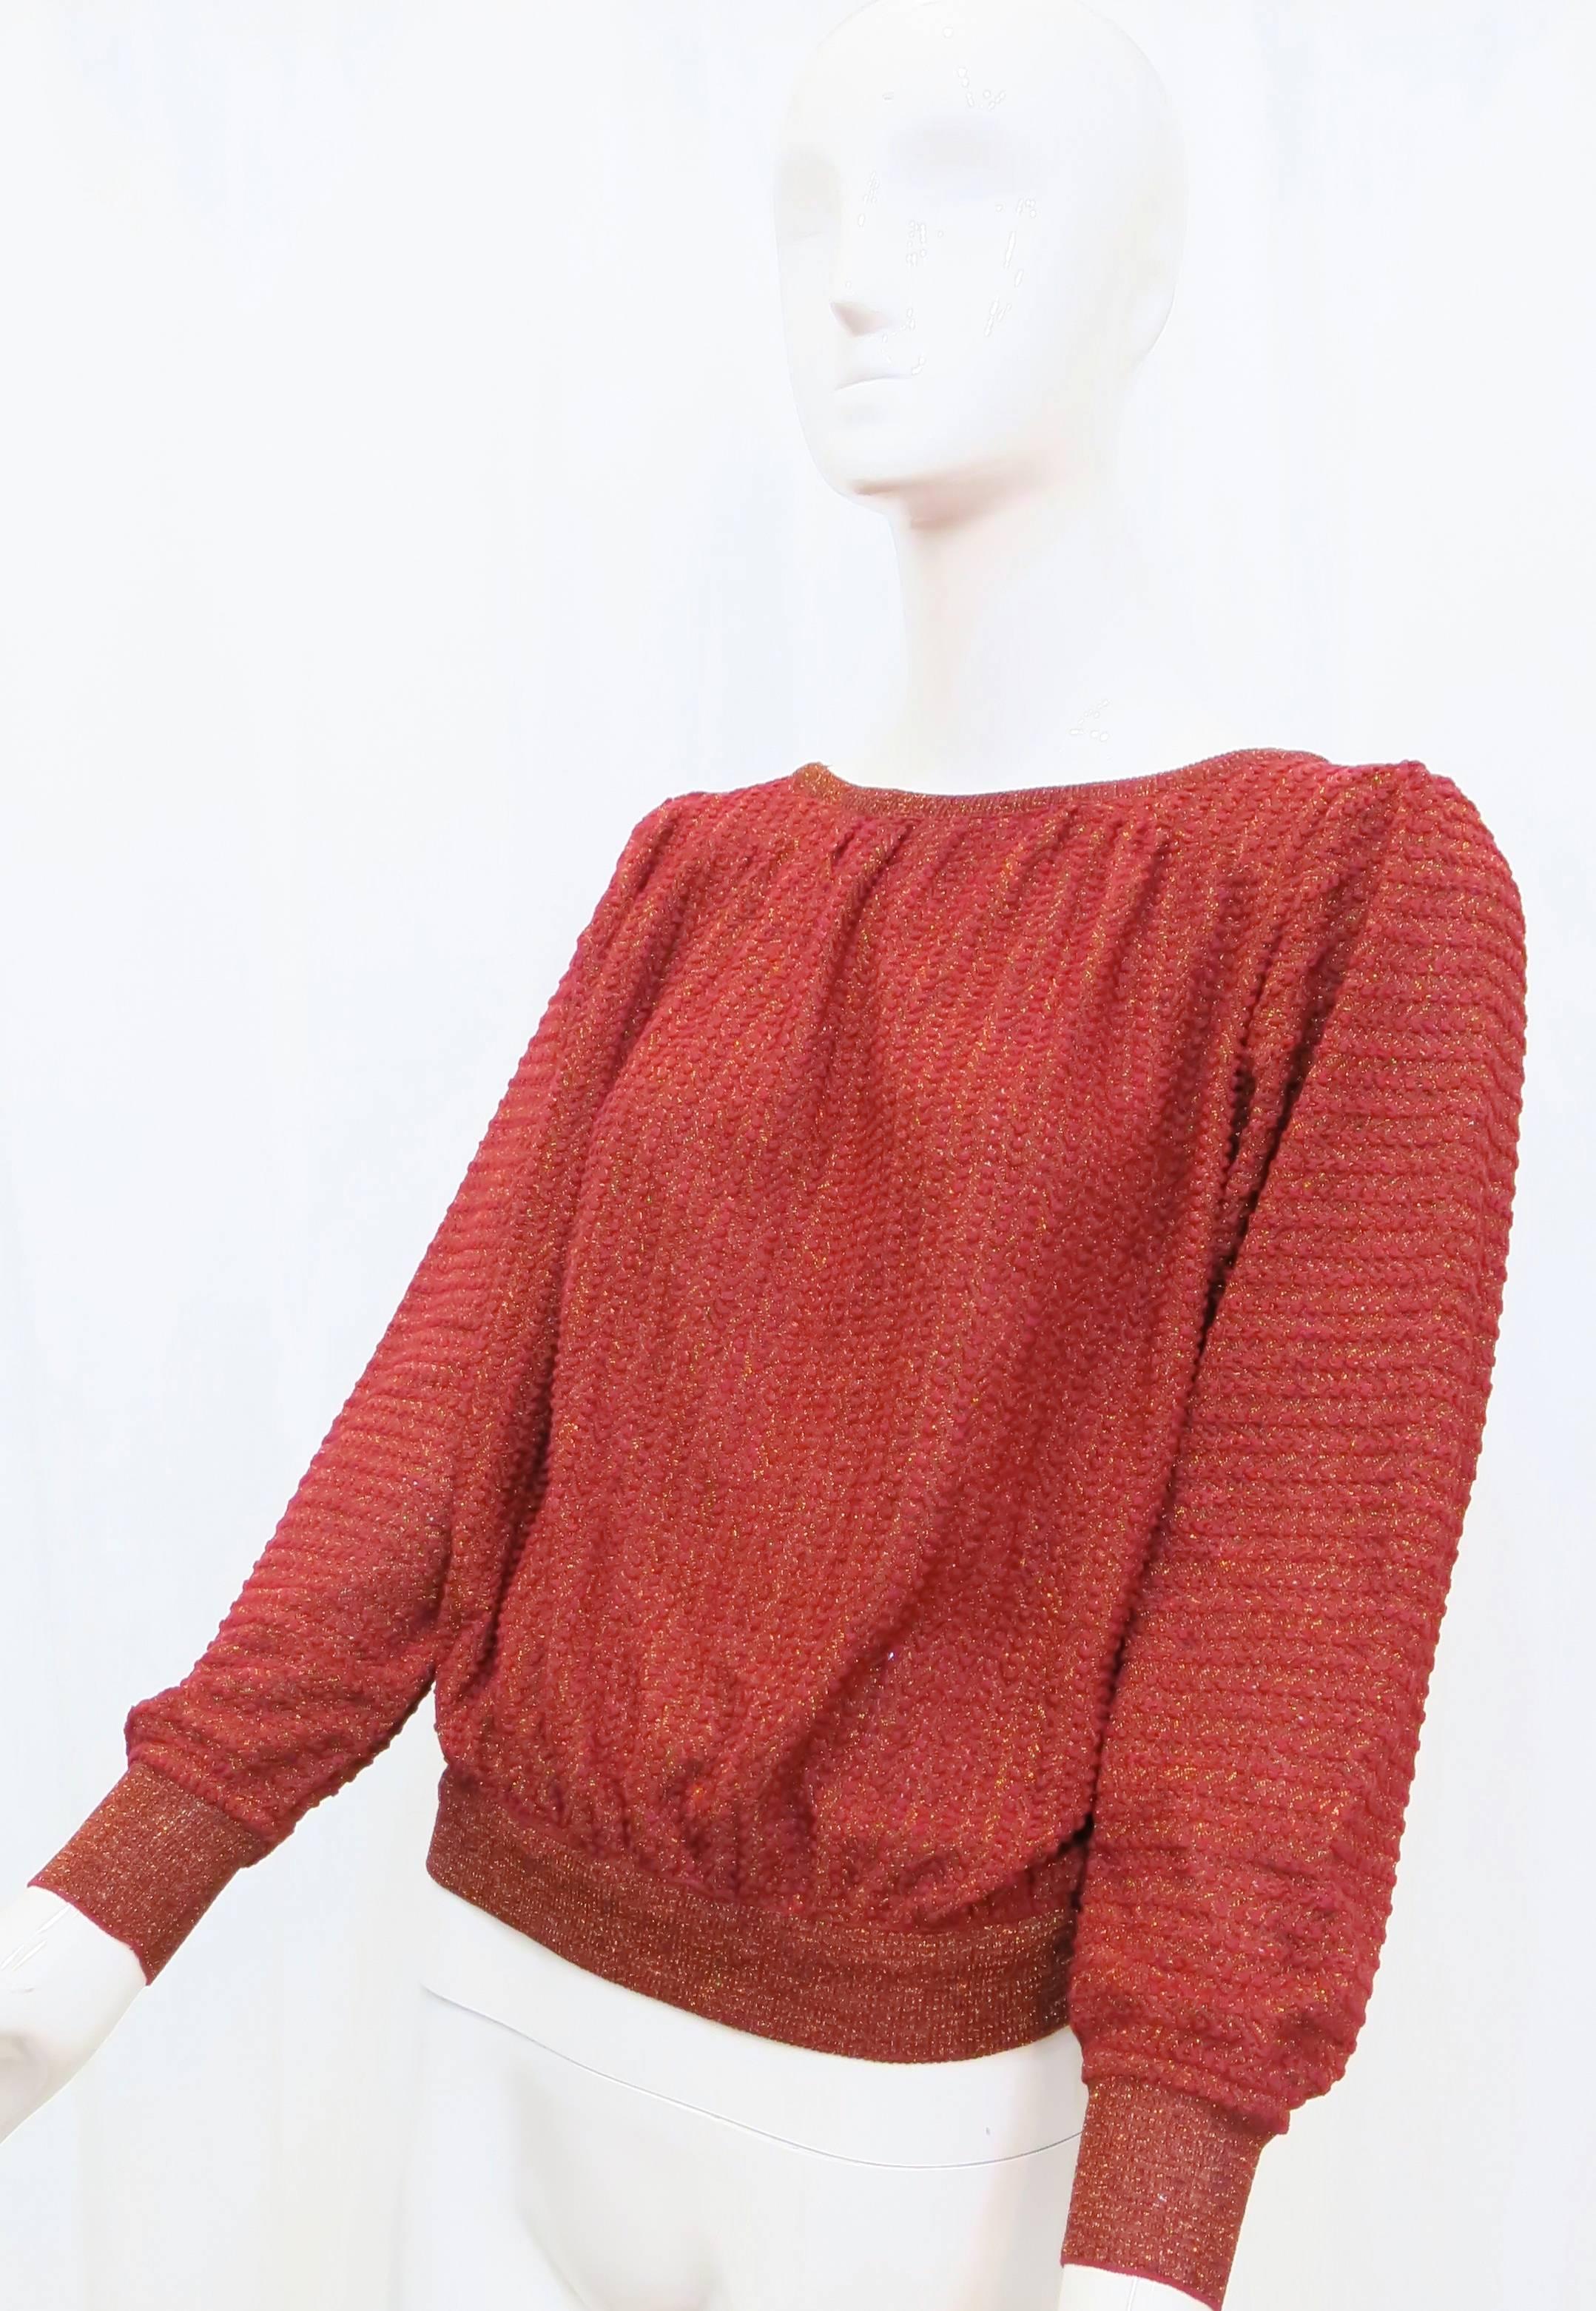 This red, shimmering sweater from Missoni can go from day to night, with ribbed sleeves, puckered shoulders and a voluminous body that pulls in to a fitted waist. Made in Italy.

Size marked: M

*Please contact dealer prior to purchase for white